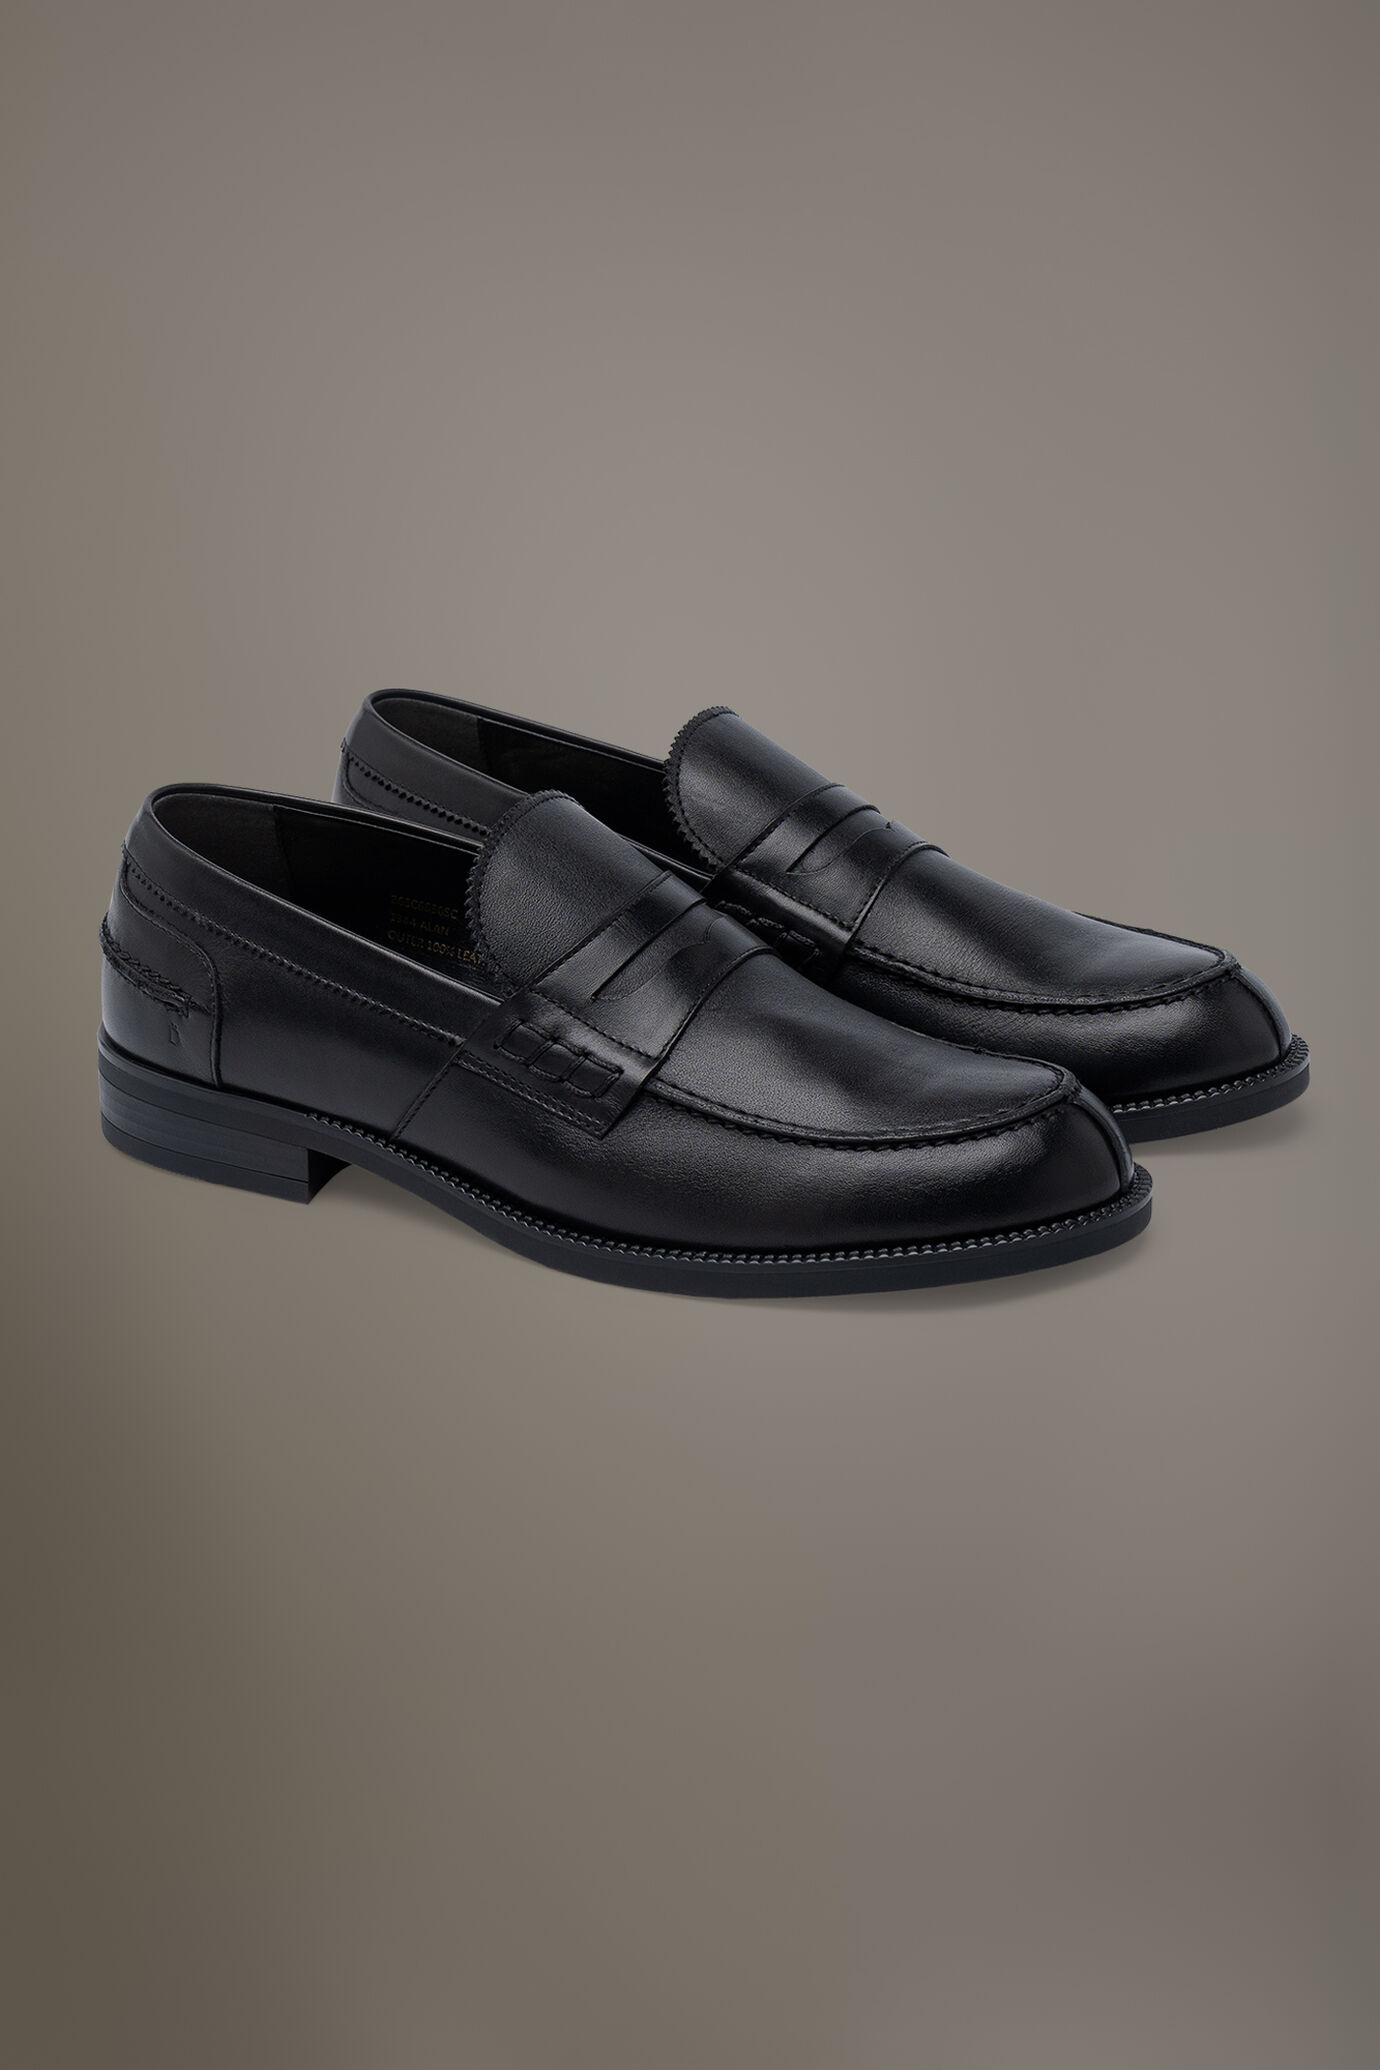 Loafer shoes 100% brushed leather with rubber sole